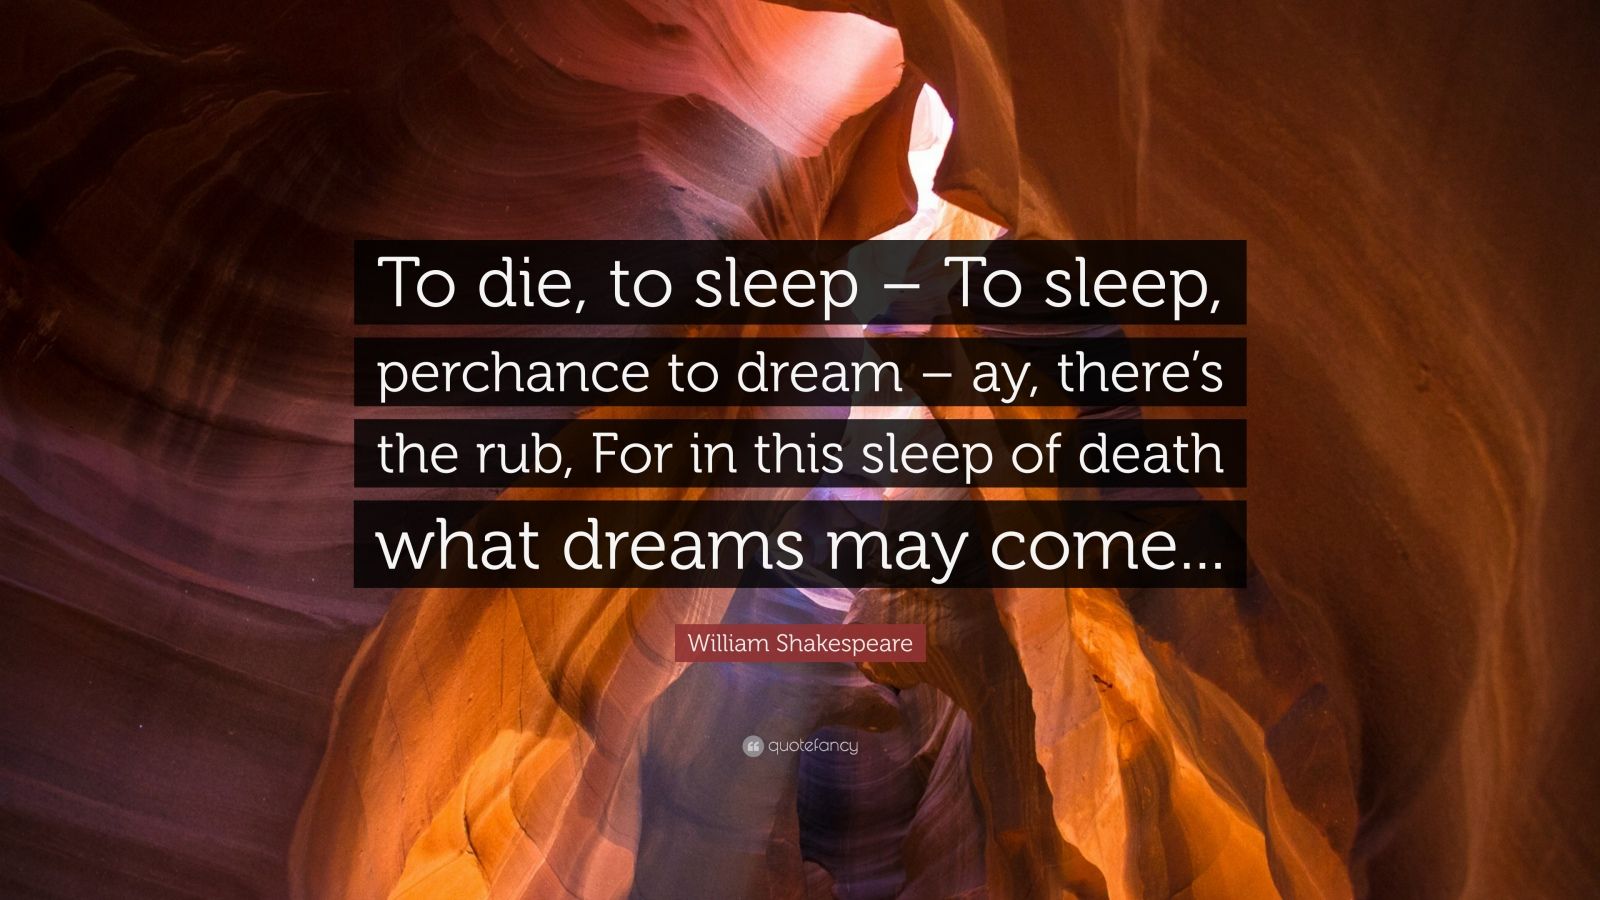 William Shakespeare Quote: “To die, to sleep – To sleep, perchance to